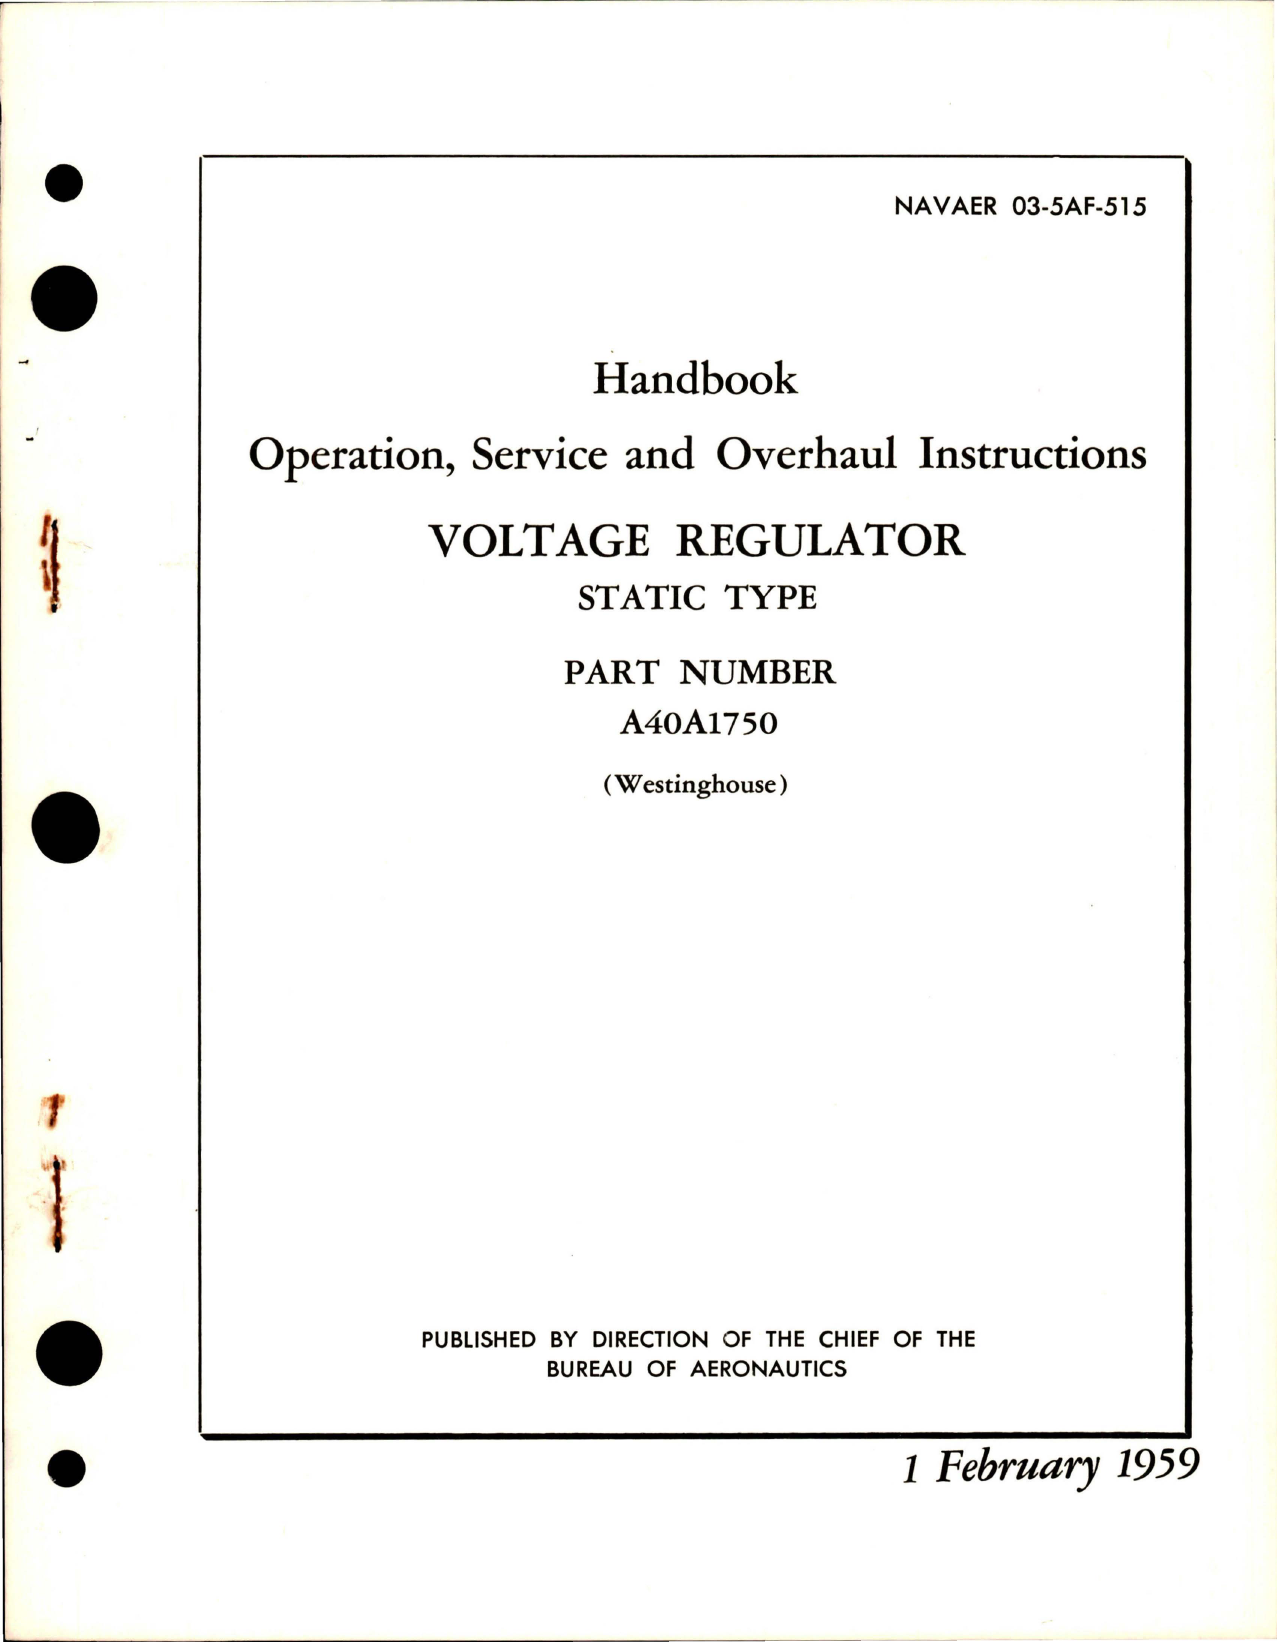 Sample page 1 from AirCorps Library document: Operation, Service and Overhaul Instructions for Voltage Regulator - Static Type - Part A40A1750